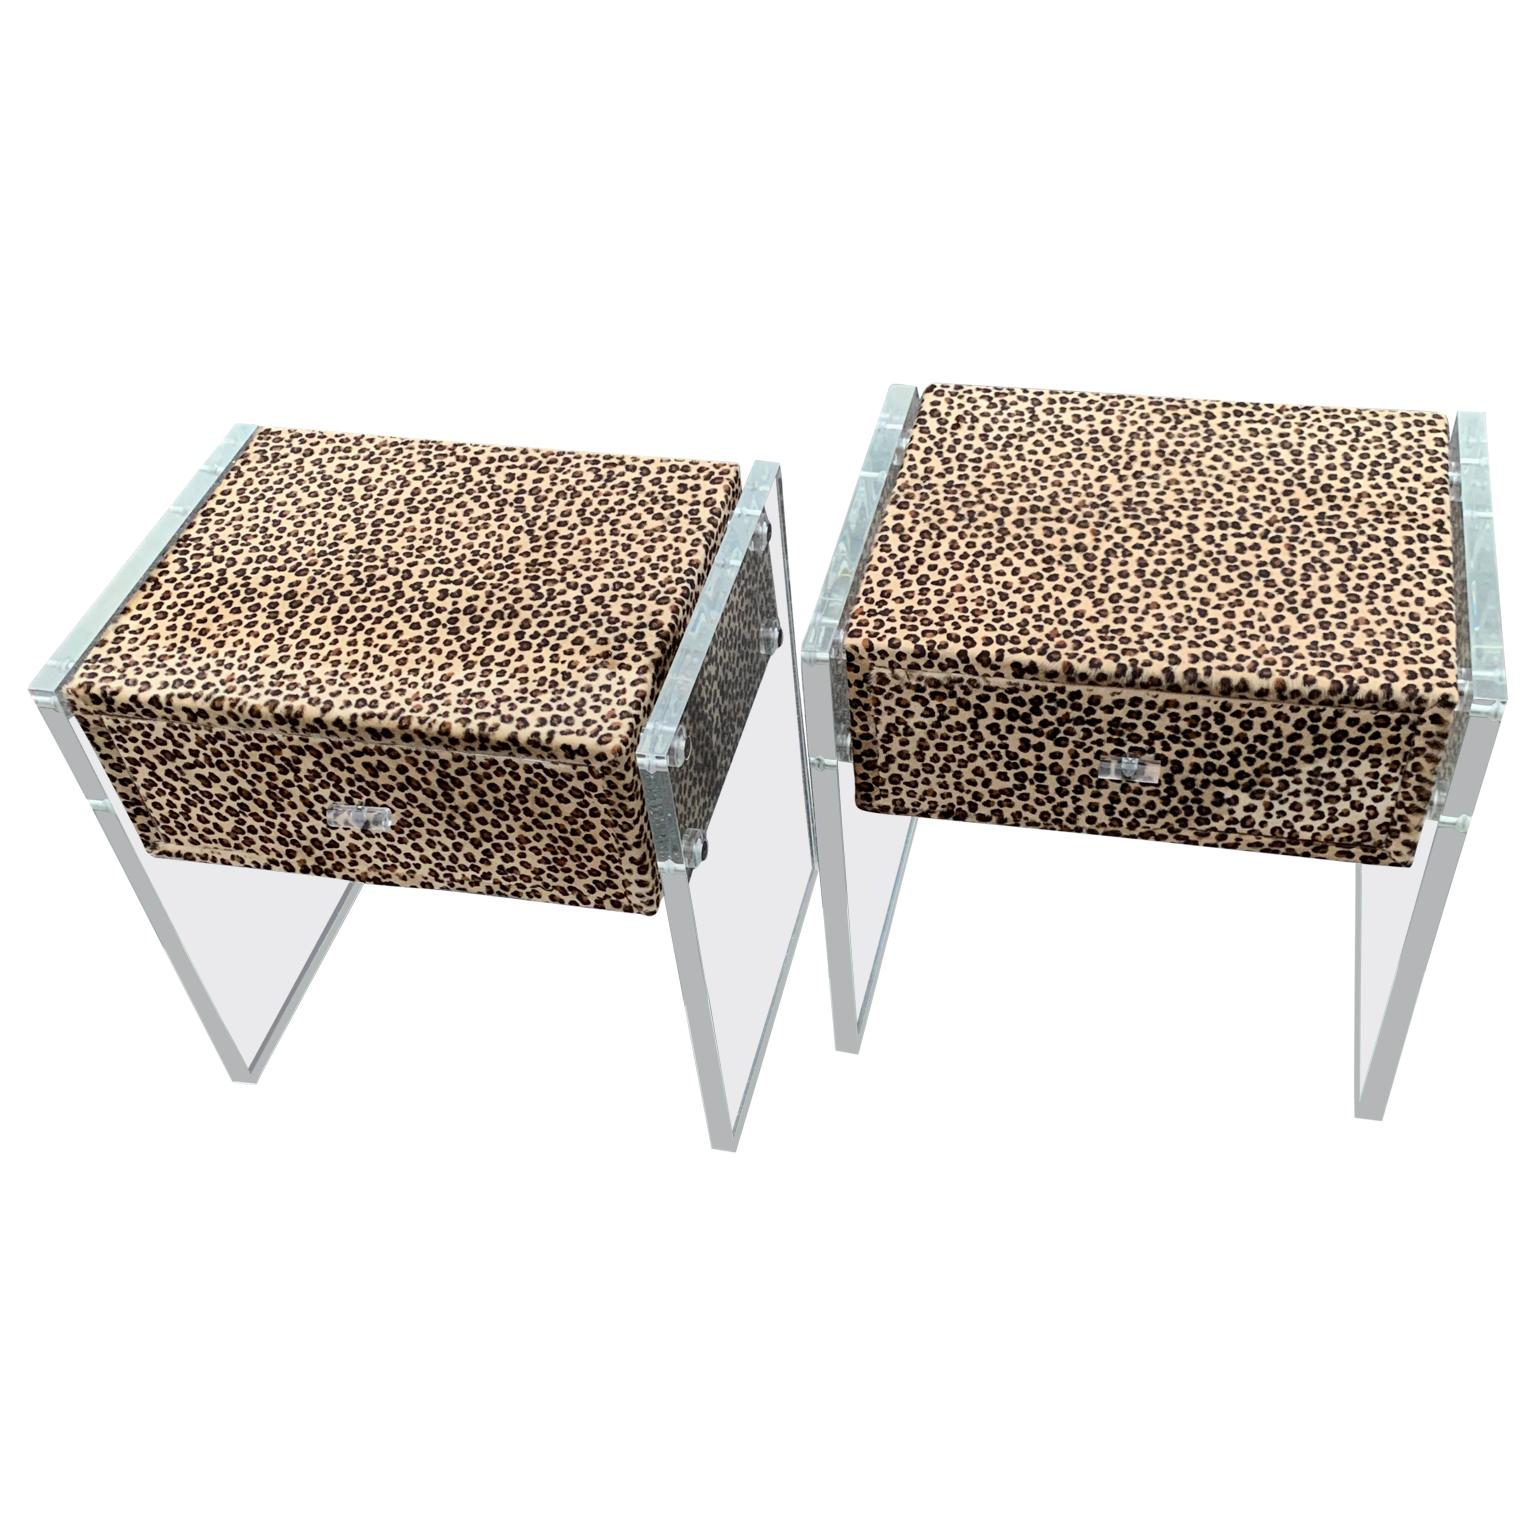 American Pair of Faux Cheetah Skin Upholstered Nightstands with Lucite Side Panels